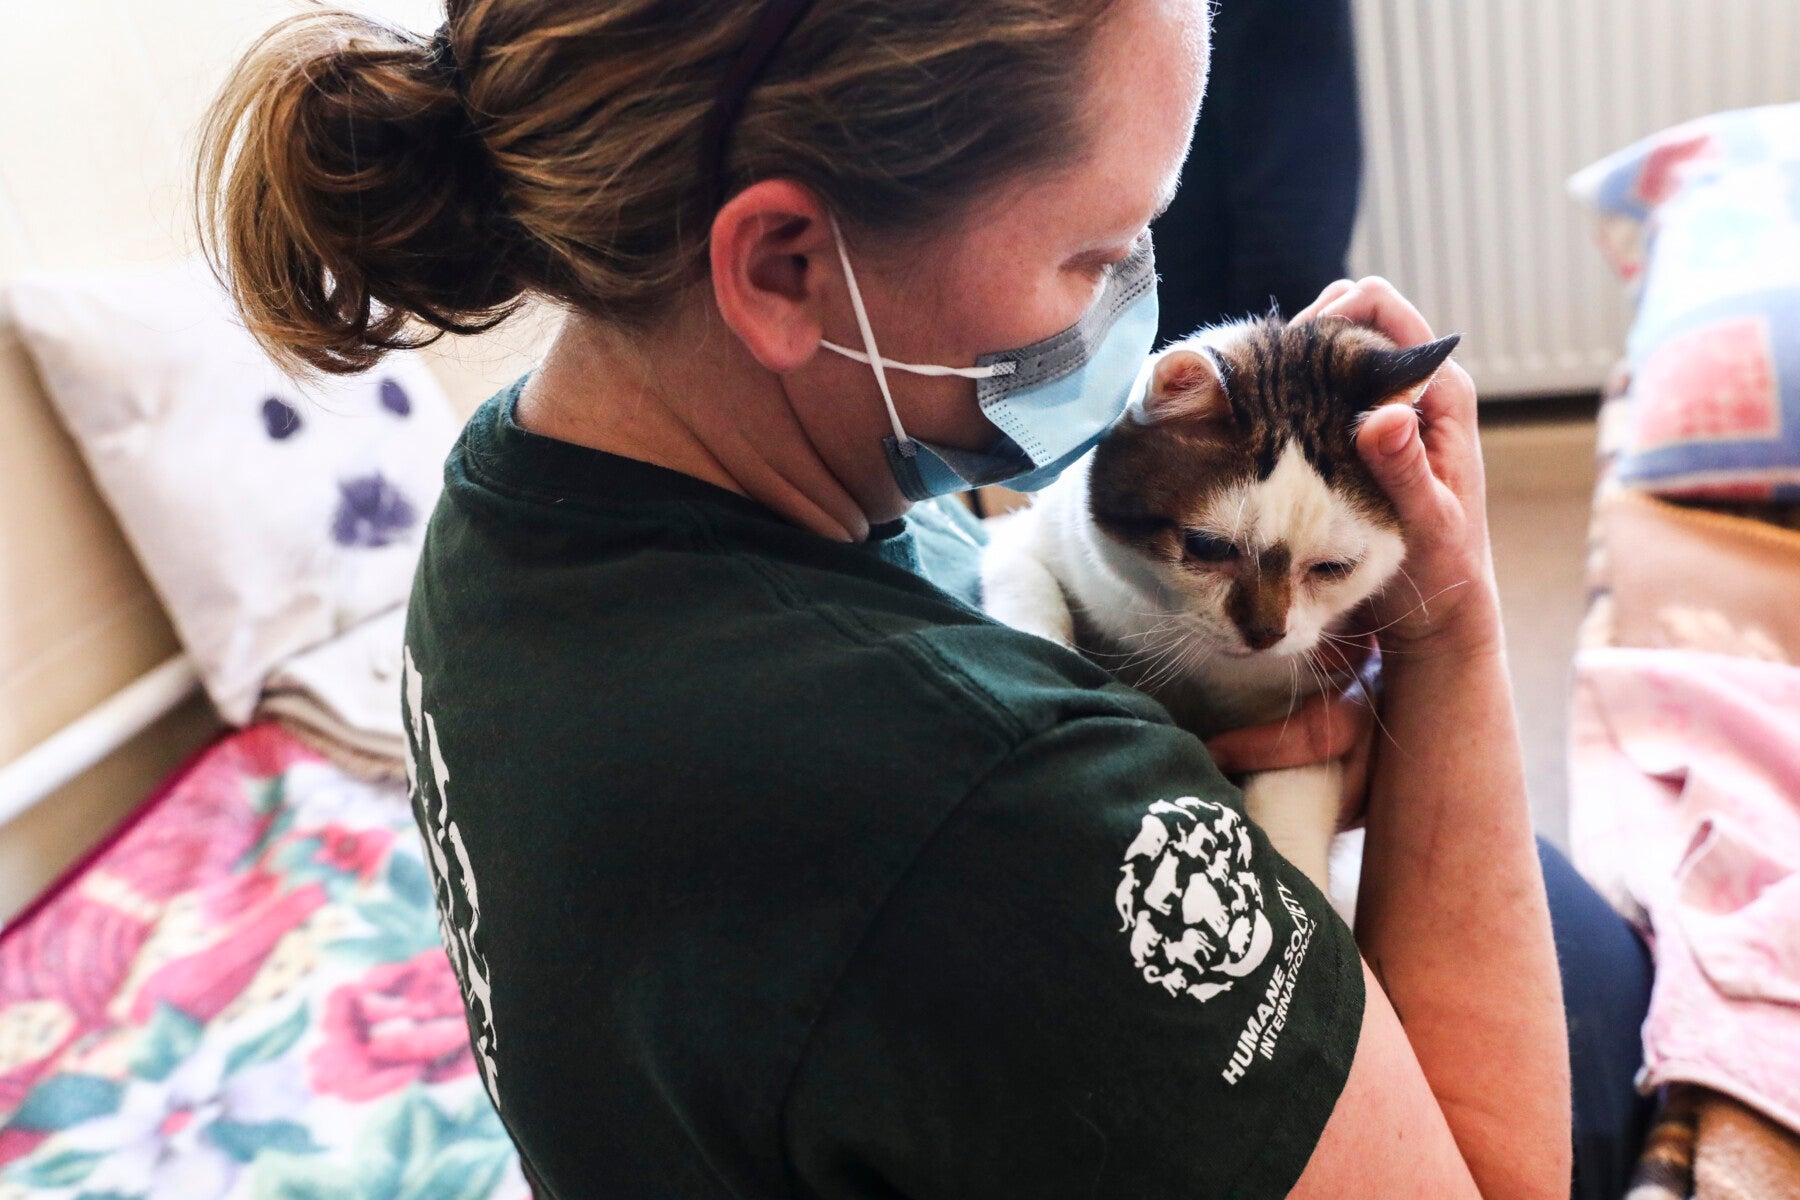 Free veterinary care for pets of Ukrainian refugees launched across Europe  - Humane Society International